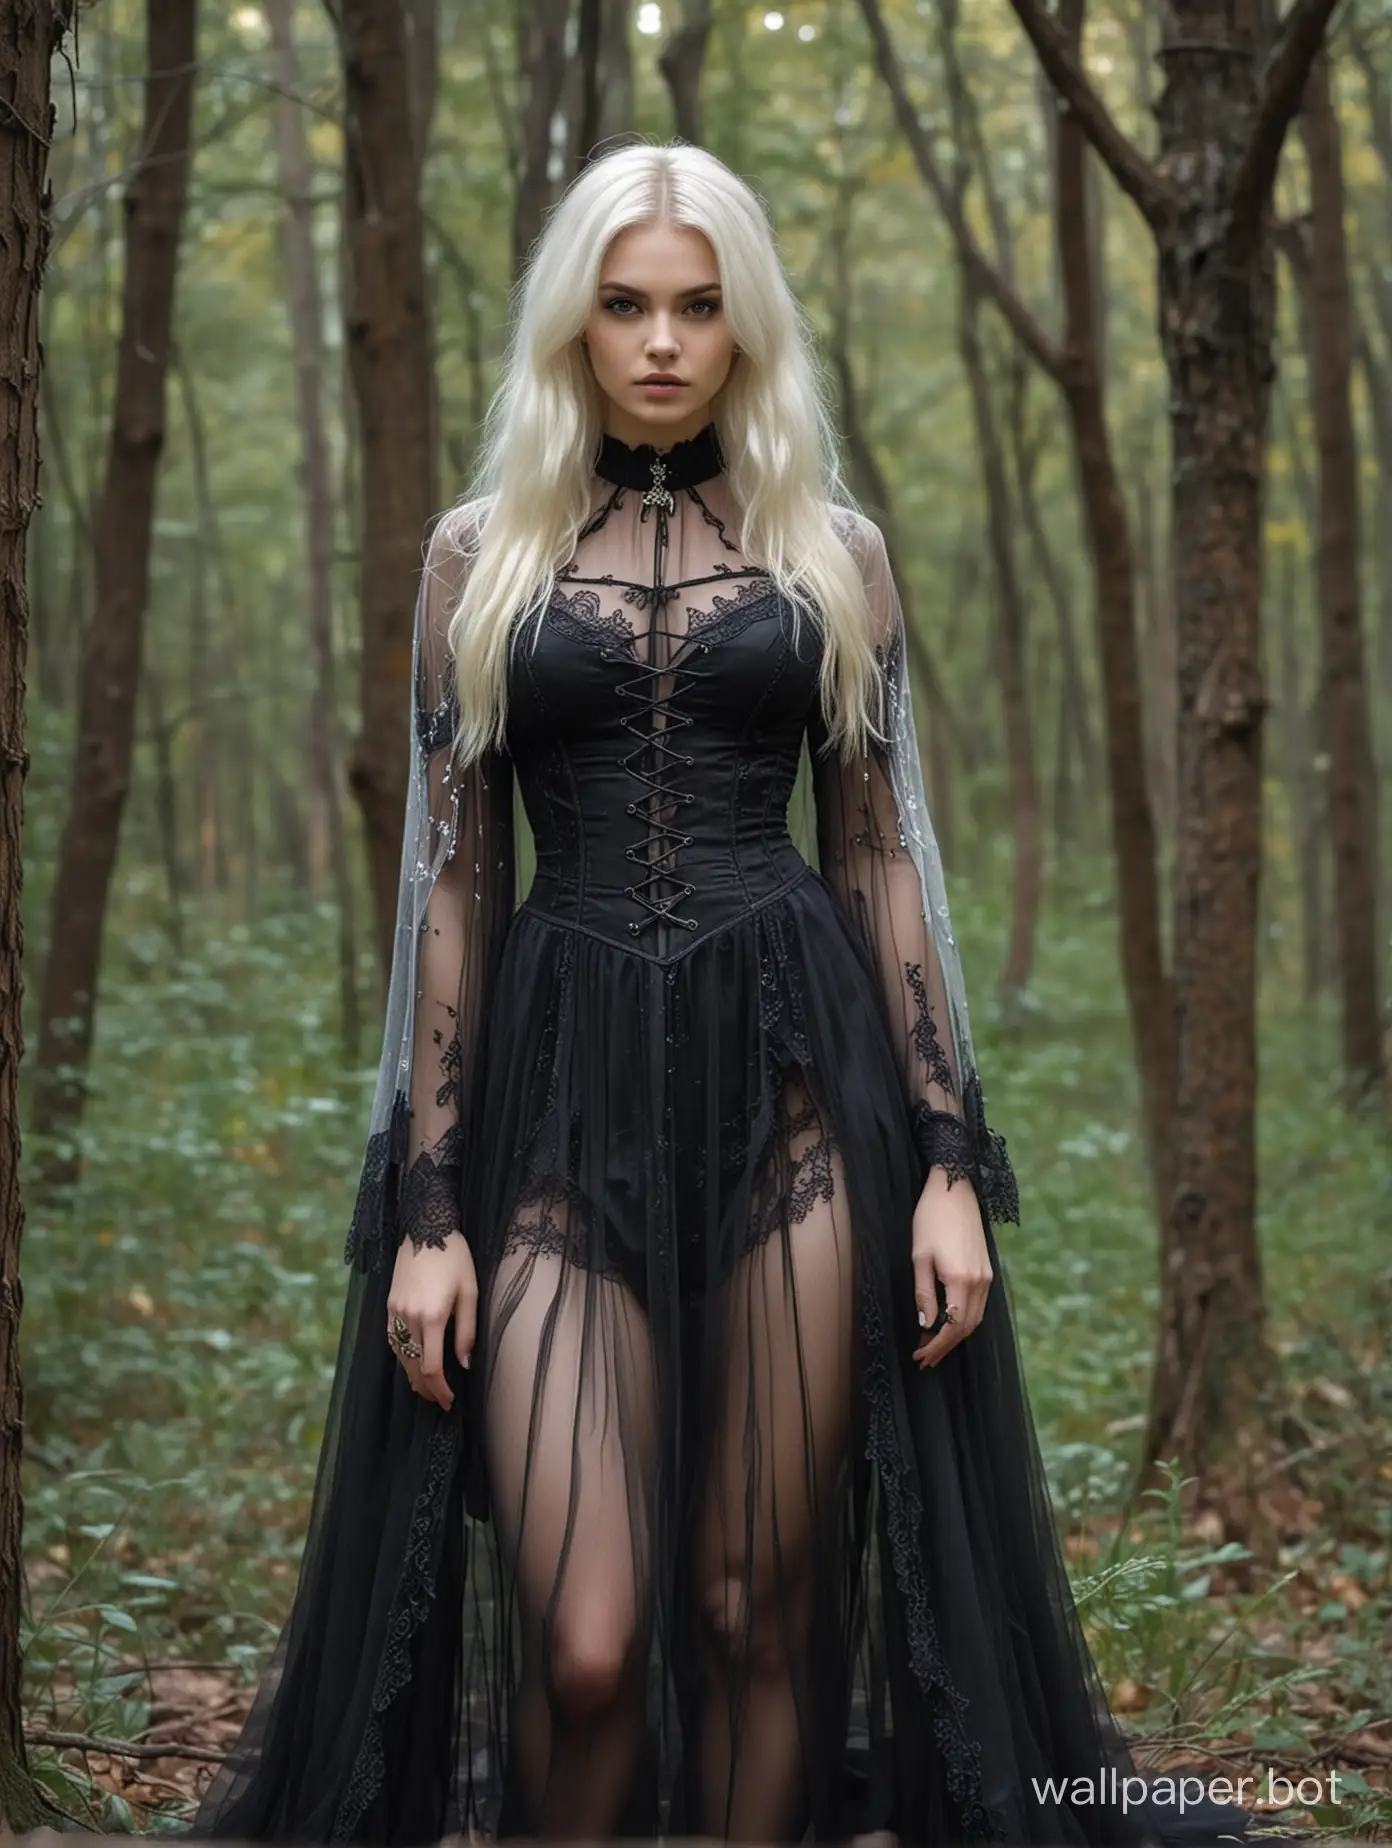 Enchanting-Forest-Photoshoot-Stunning-18YearOld-Russian-Model-in-Sheer-Gothic-Costume